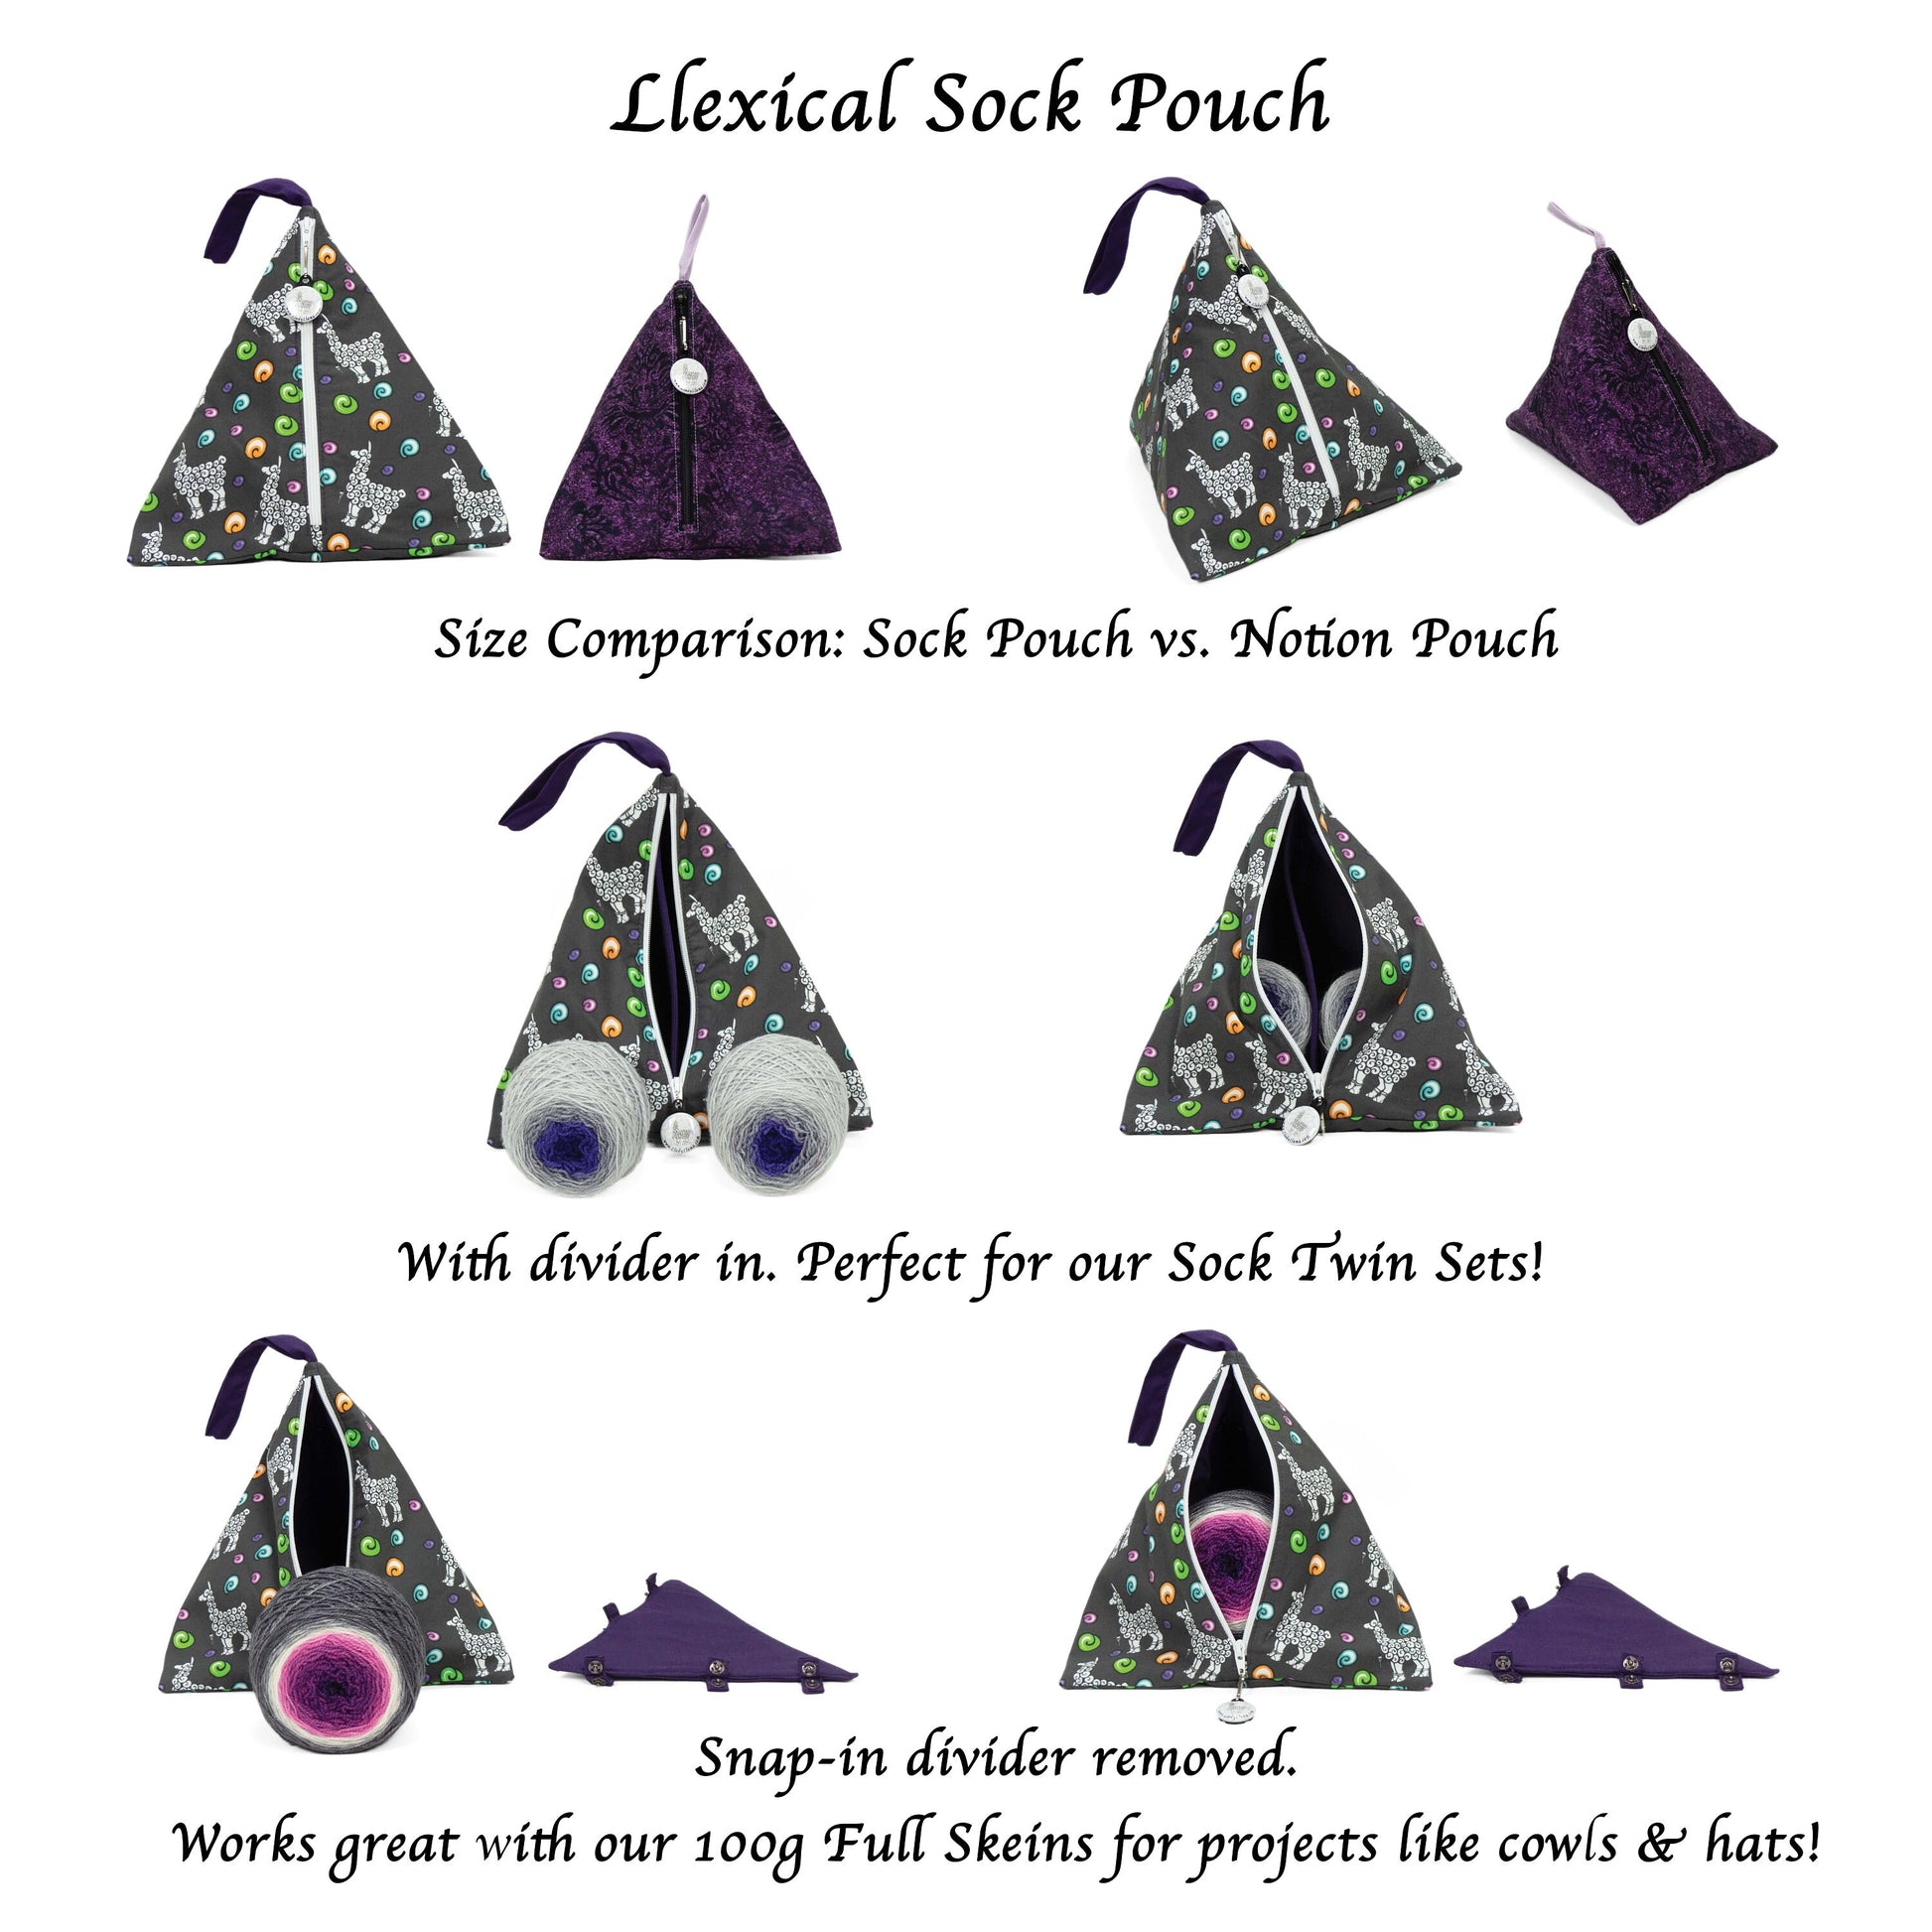 Light In The Night - Llexical Divided Sock Pouch - Knitting, Crochet, Spinning Project Bag